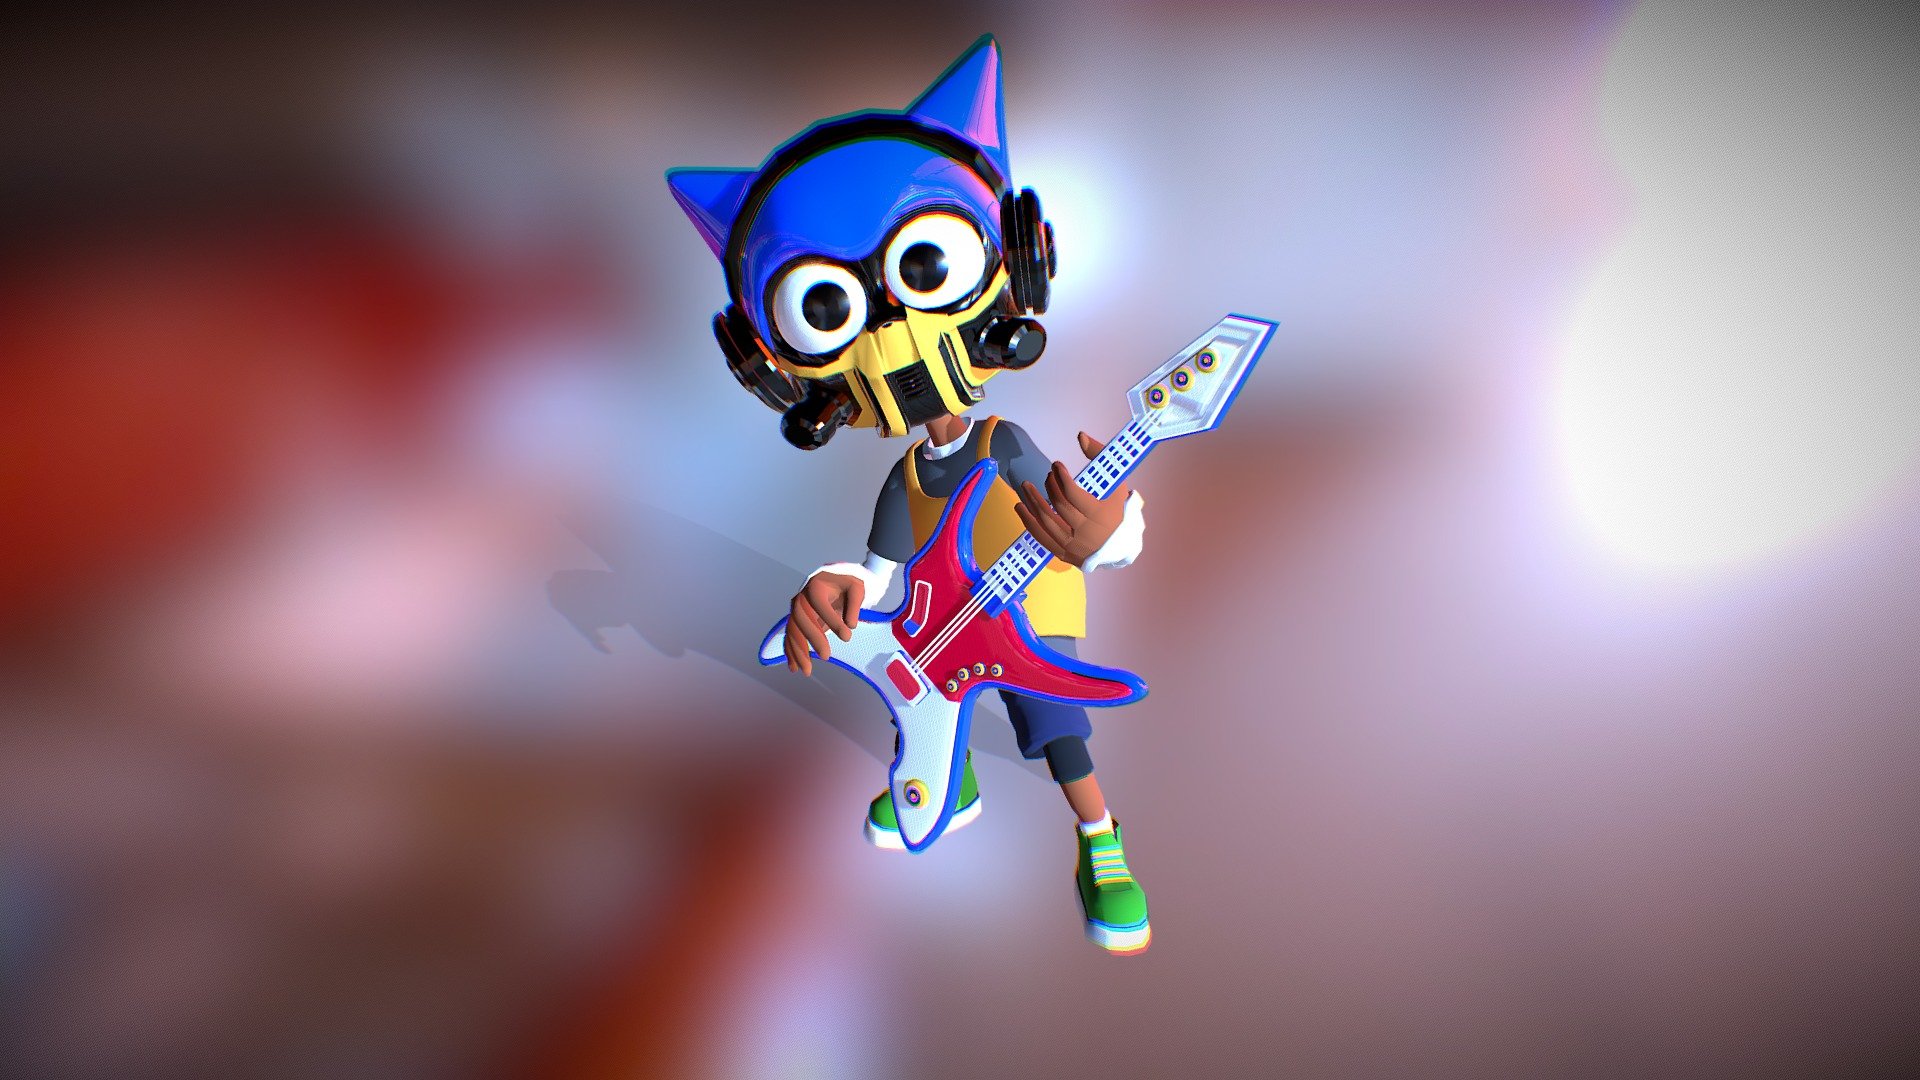 Cat Guitarist Character Animated - Low Poly

Optimized for games (game ready), Suitable for close-UPS, illustrations and various renderings 3d model